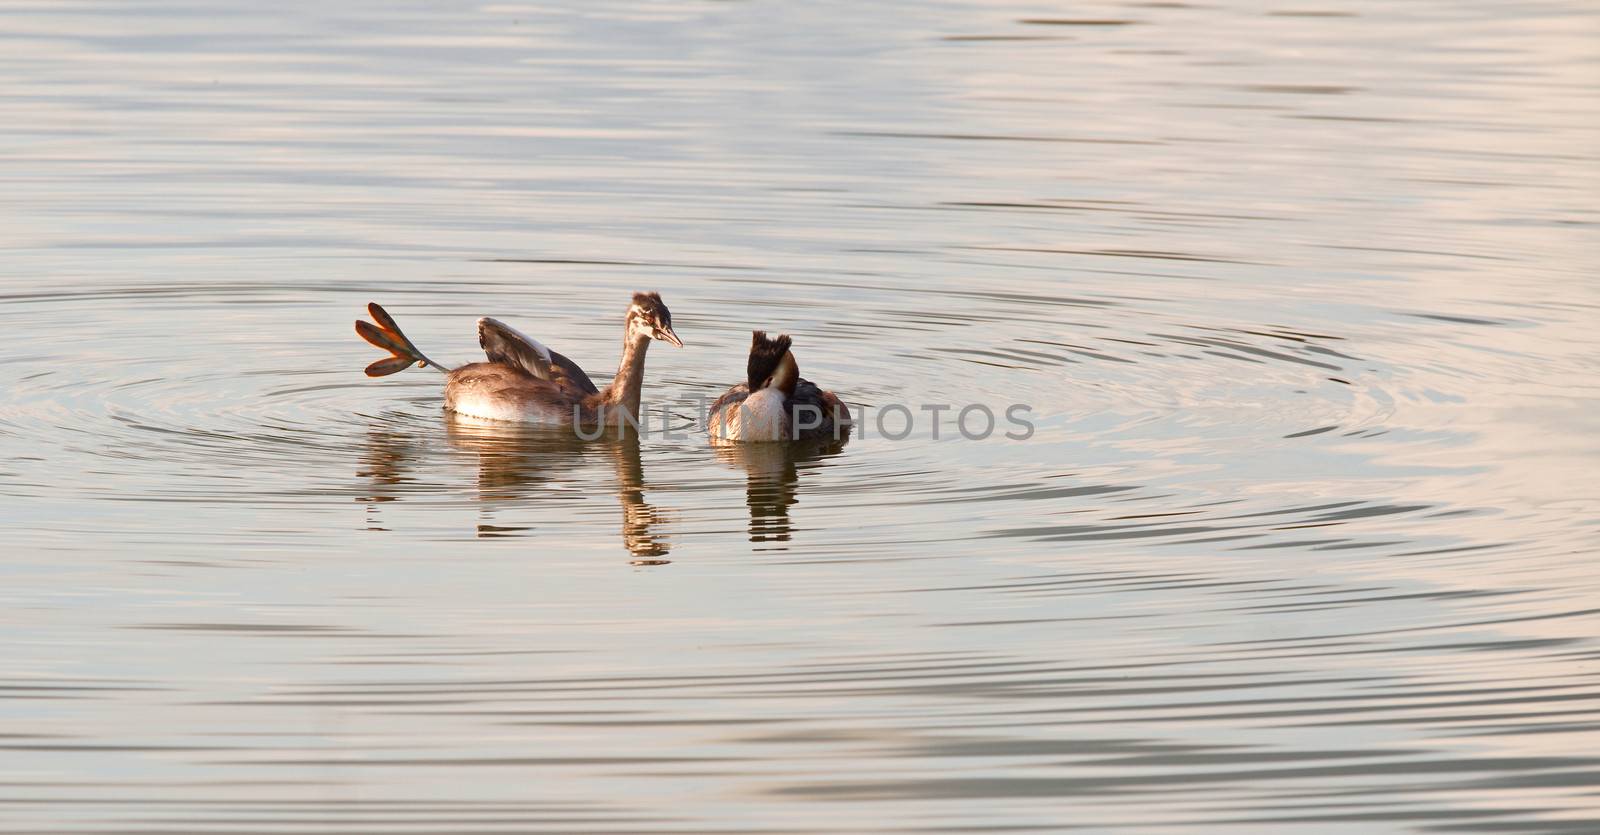 Great Crested Grebe or Podiceps cristatus by Colette